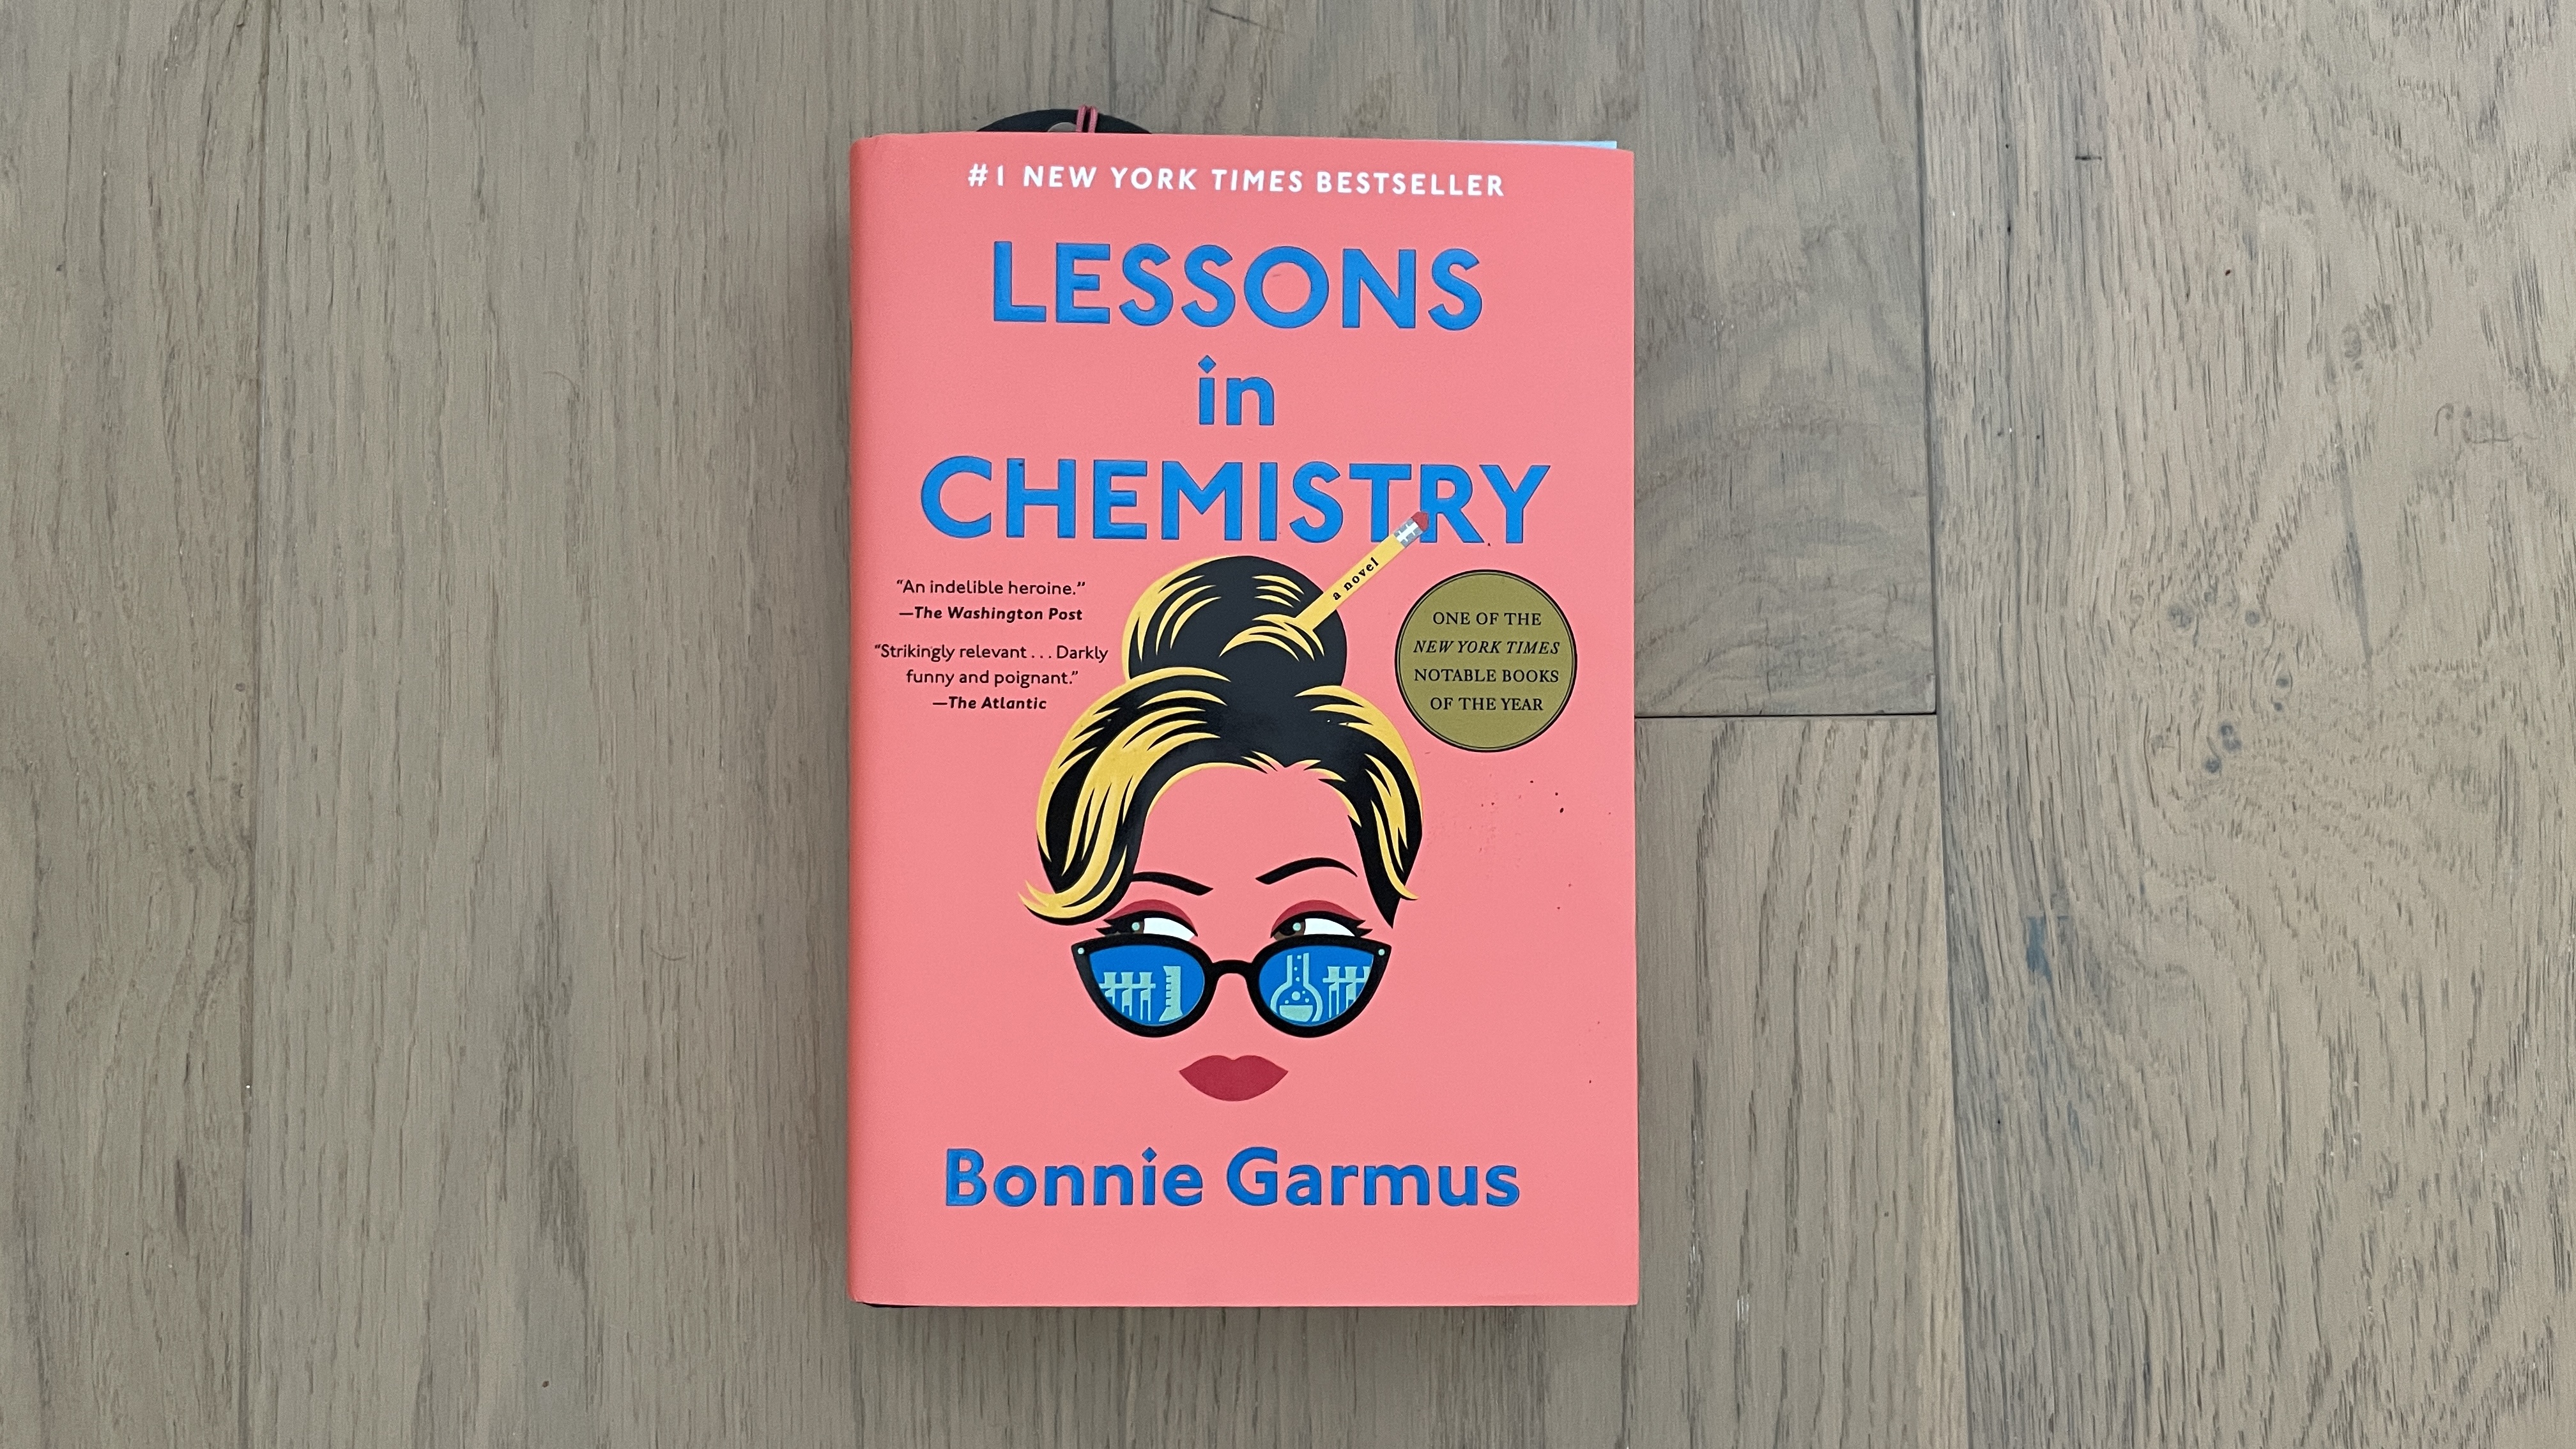 Book Review: Lessons in Chemistry by Bonnie Garmus